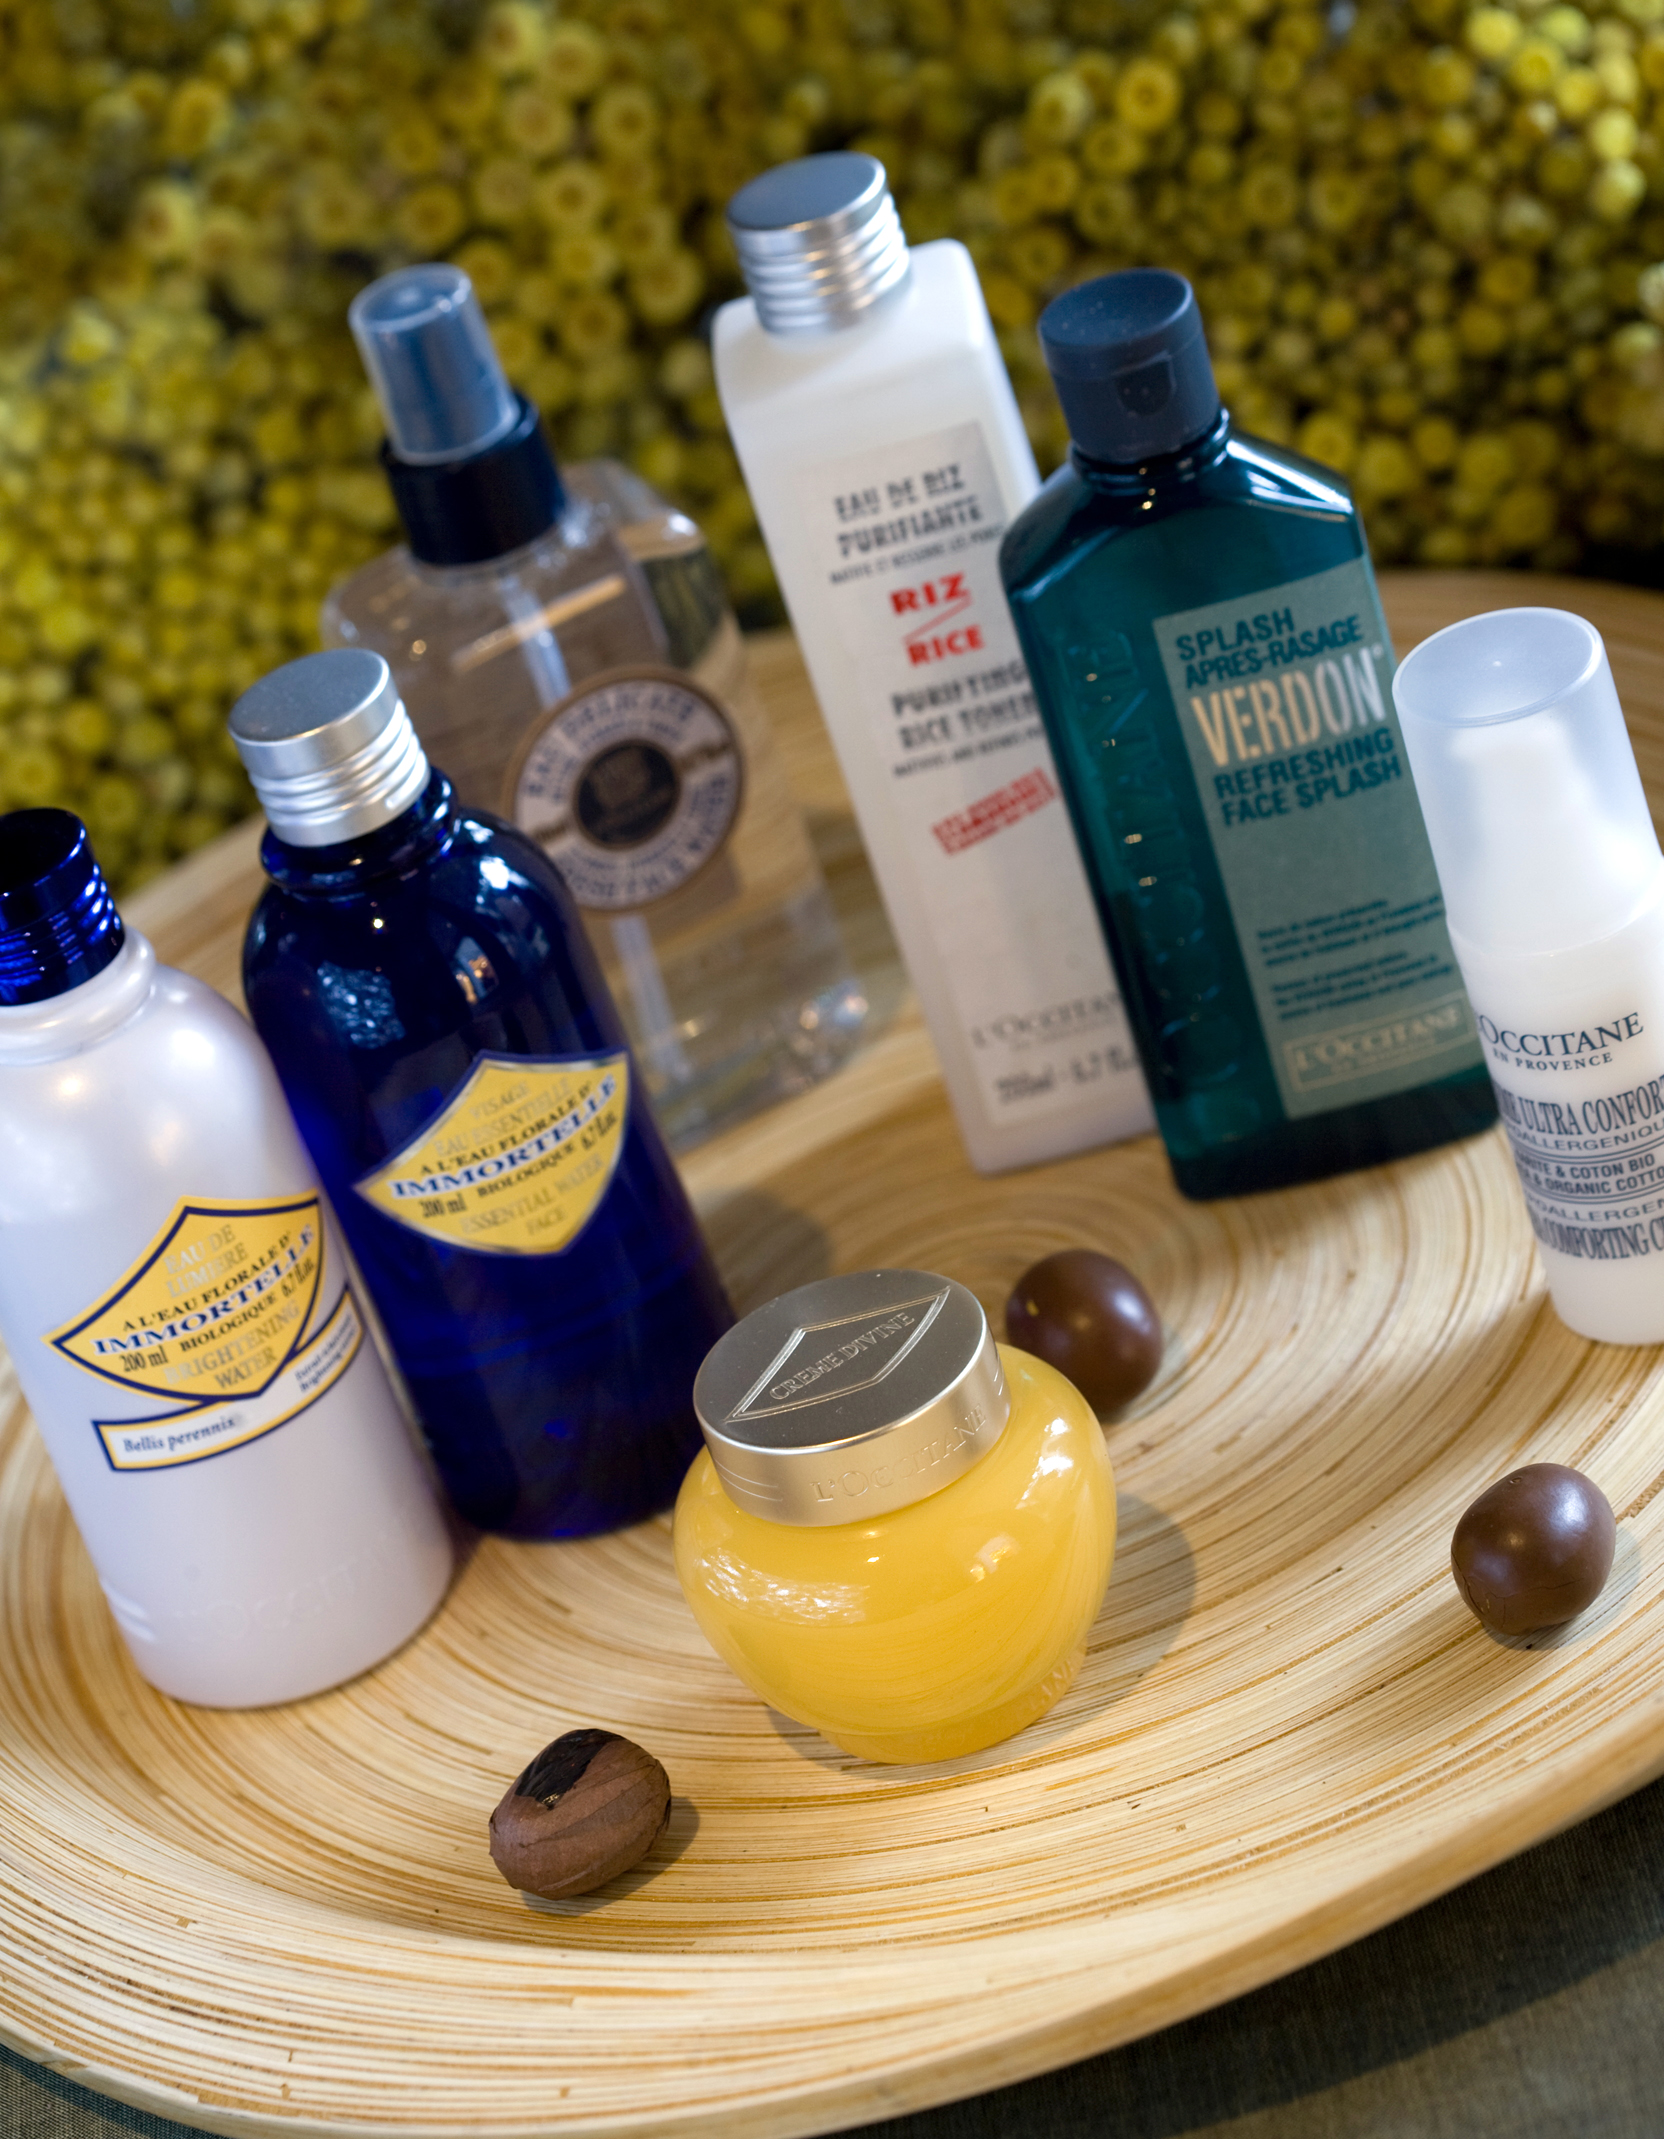 Bamboo Spa by L'Occitane Products (11)